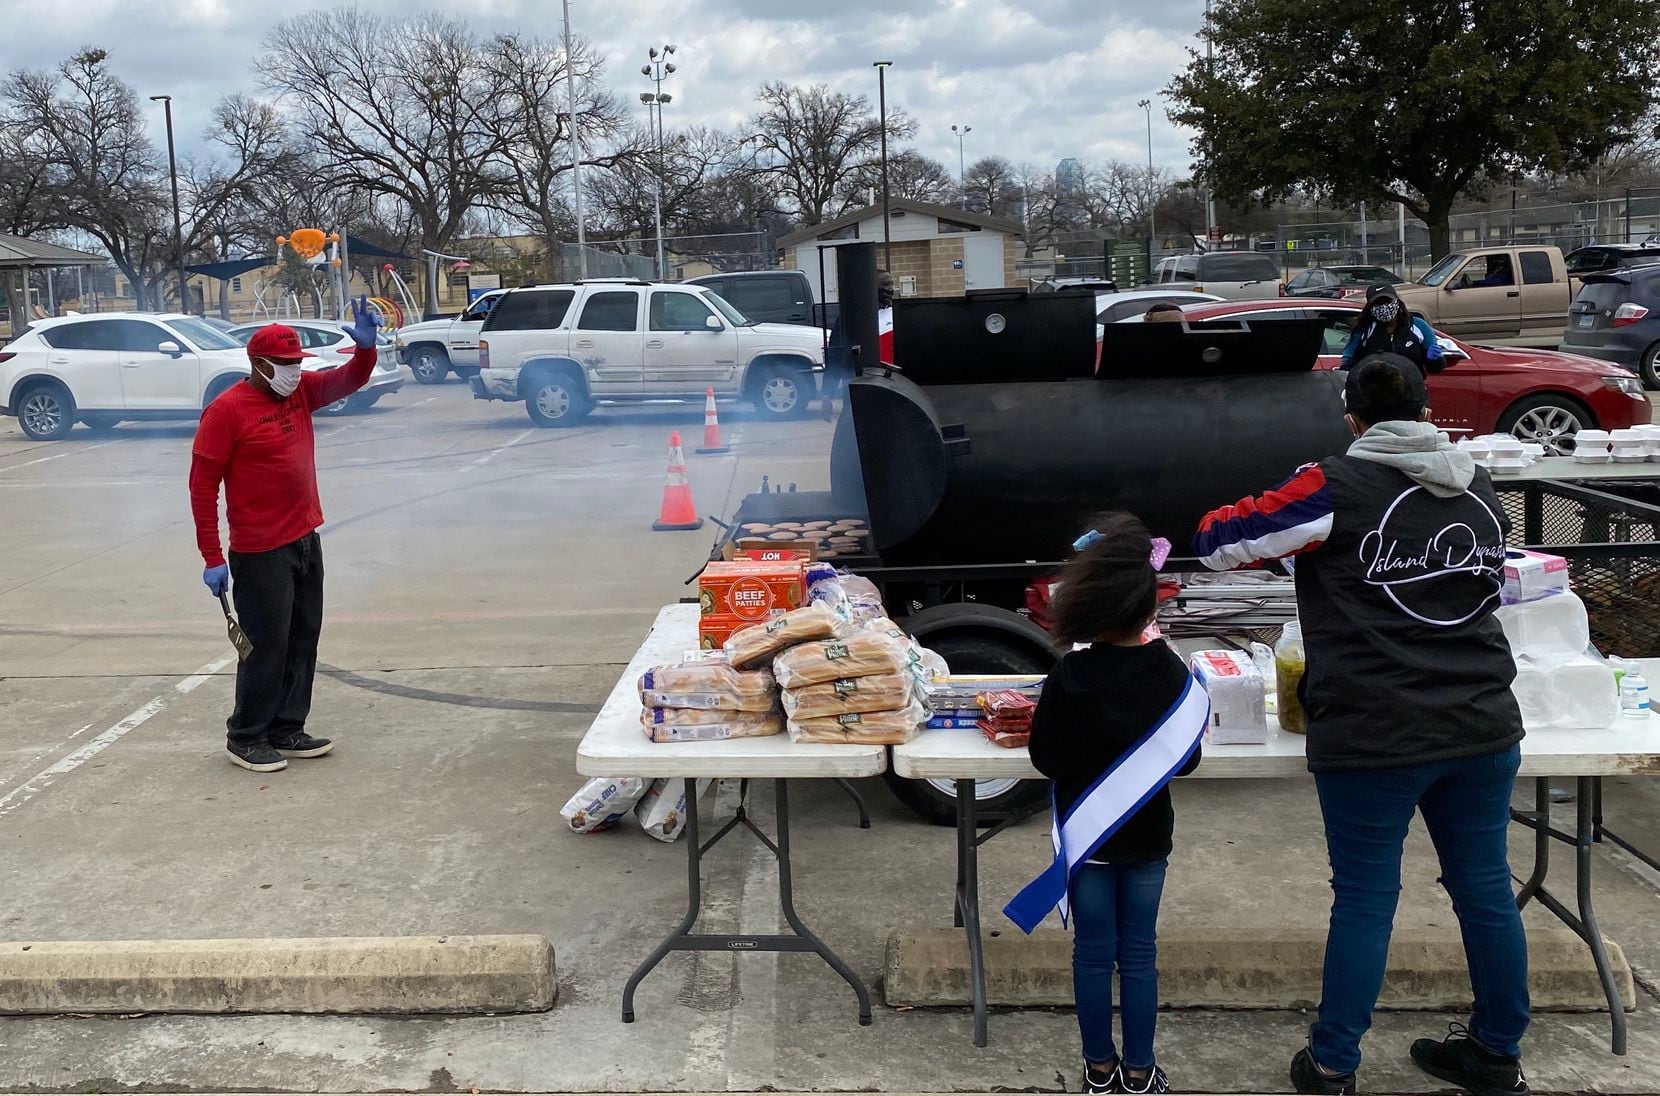 Tyrone Acy, 43, waves to volunteers at the water distribution site in West Dallas as he prepares burgers and hot dogs for families in need. Acy and his wife Erika own Mama 30's Off The Bone BBQ and were able to serve 300 hot meals Sunday.